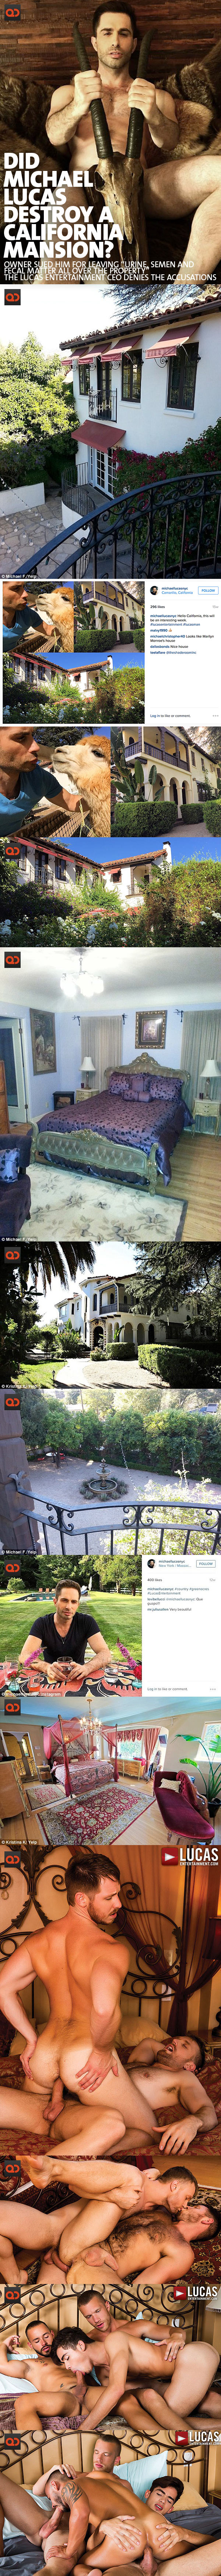 Did Michael Lucas Destroyed A California Mansion? Owner Sued Him For Leavind “Urine, Semen And Fecal Matter All Over The Property” The Lucas Entertainment CEO Denies The Accusations